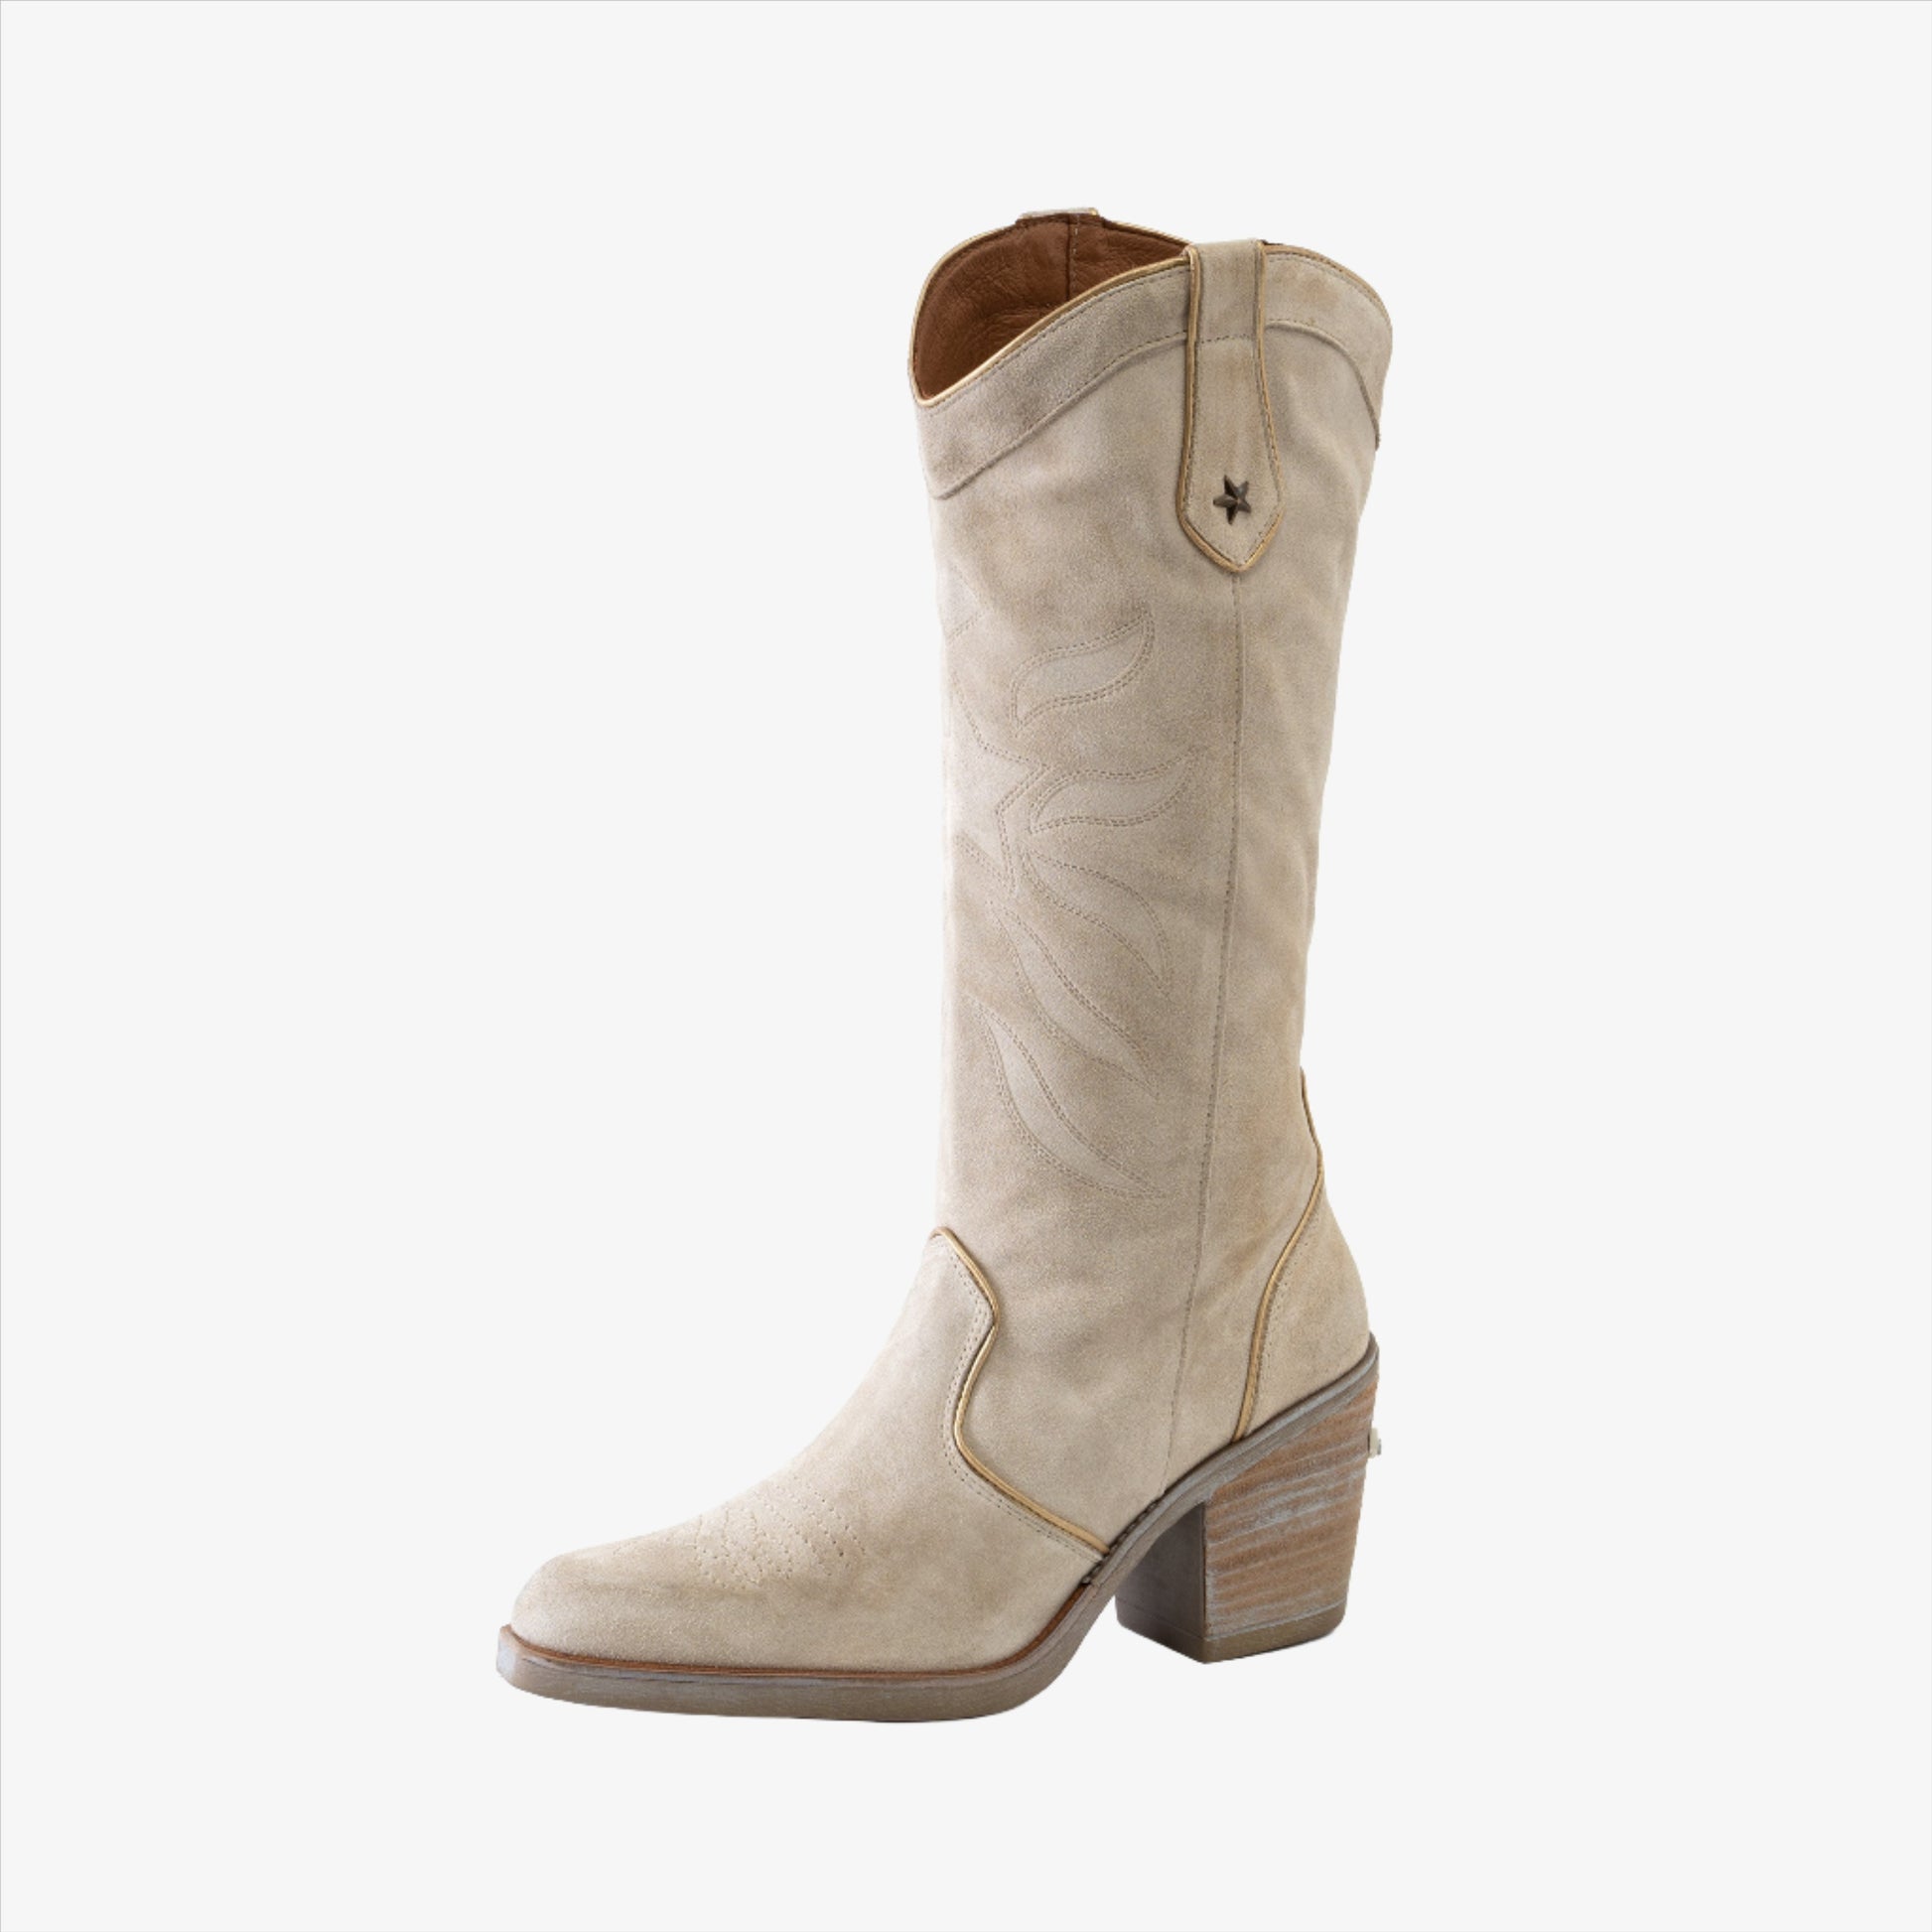 Kansas - suede boots with gold detailing Tall Boots PALLADIO